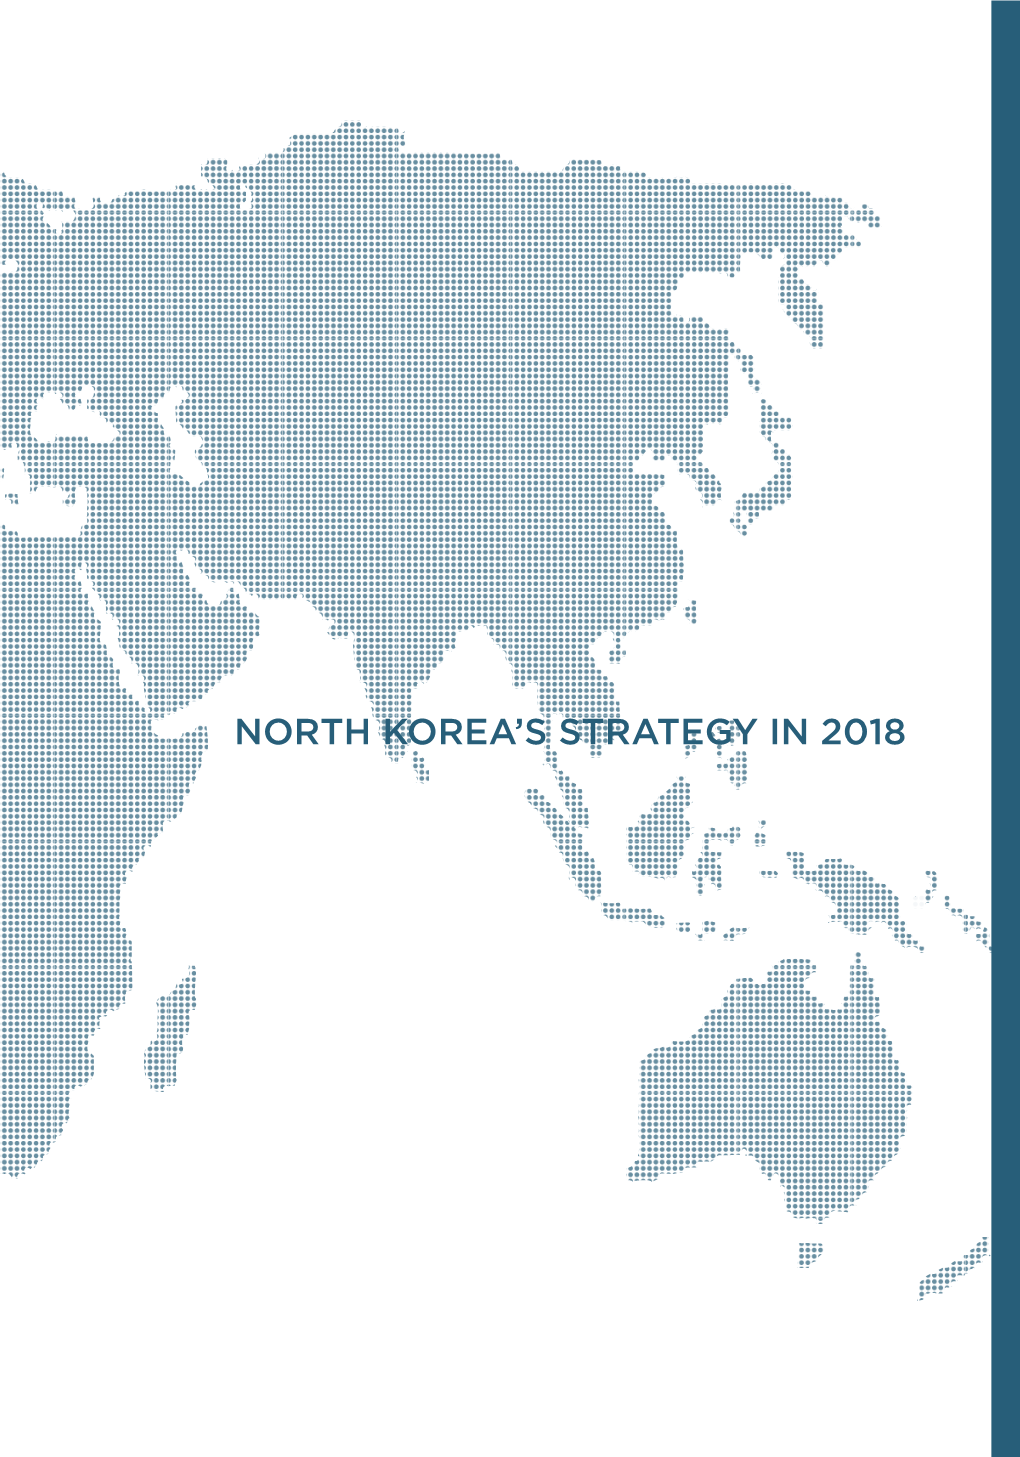 North Korea's Strategy in 2018